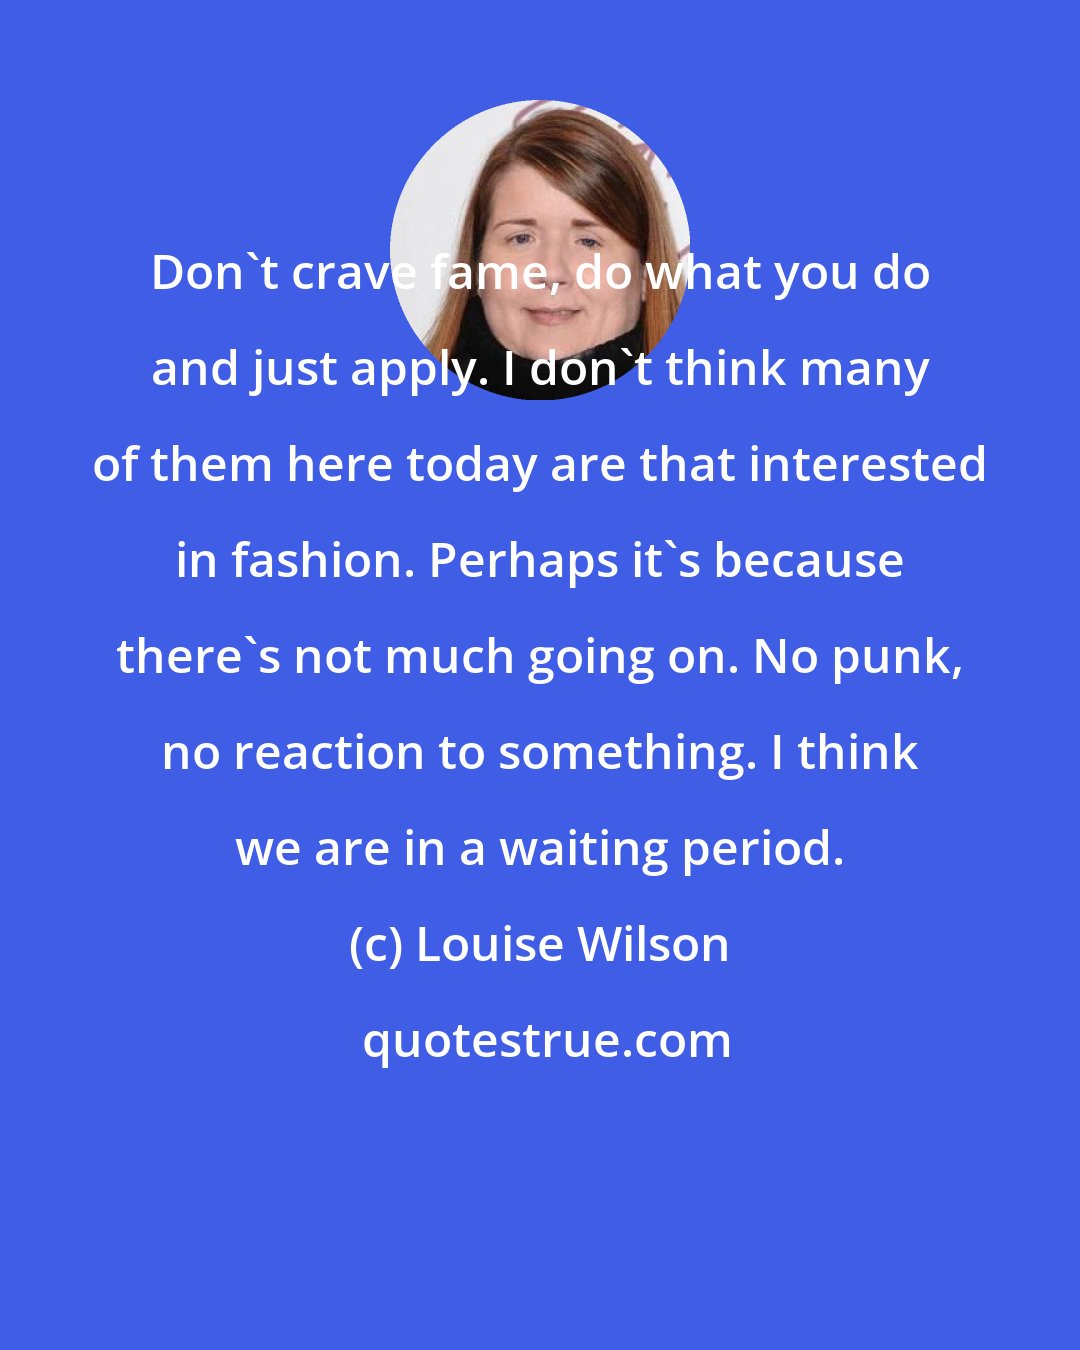 Louise Wilson: Don't crave fame, do what you do and just apply. I don't think many of them here today are that interested in fashion. Perhaps it's because there's not much going on. No punk, no reaction to something. I think we are in a waiting period.